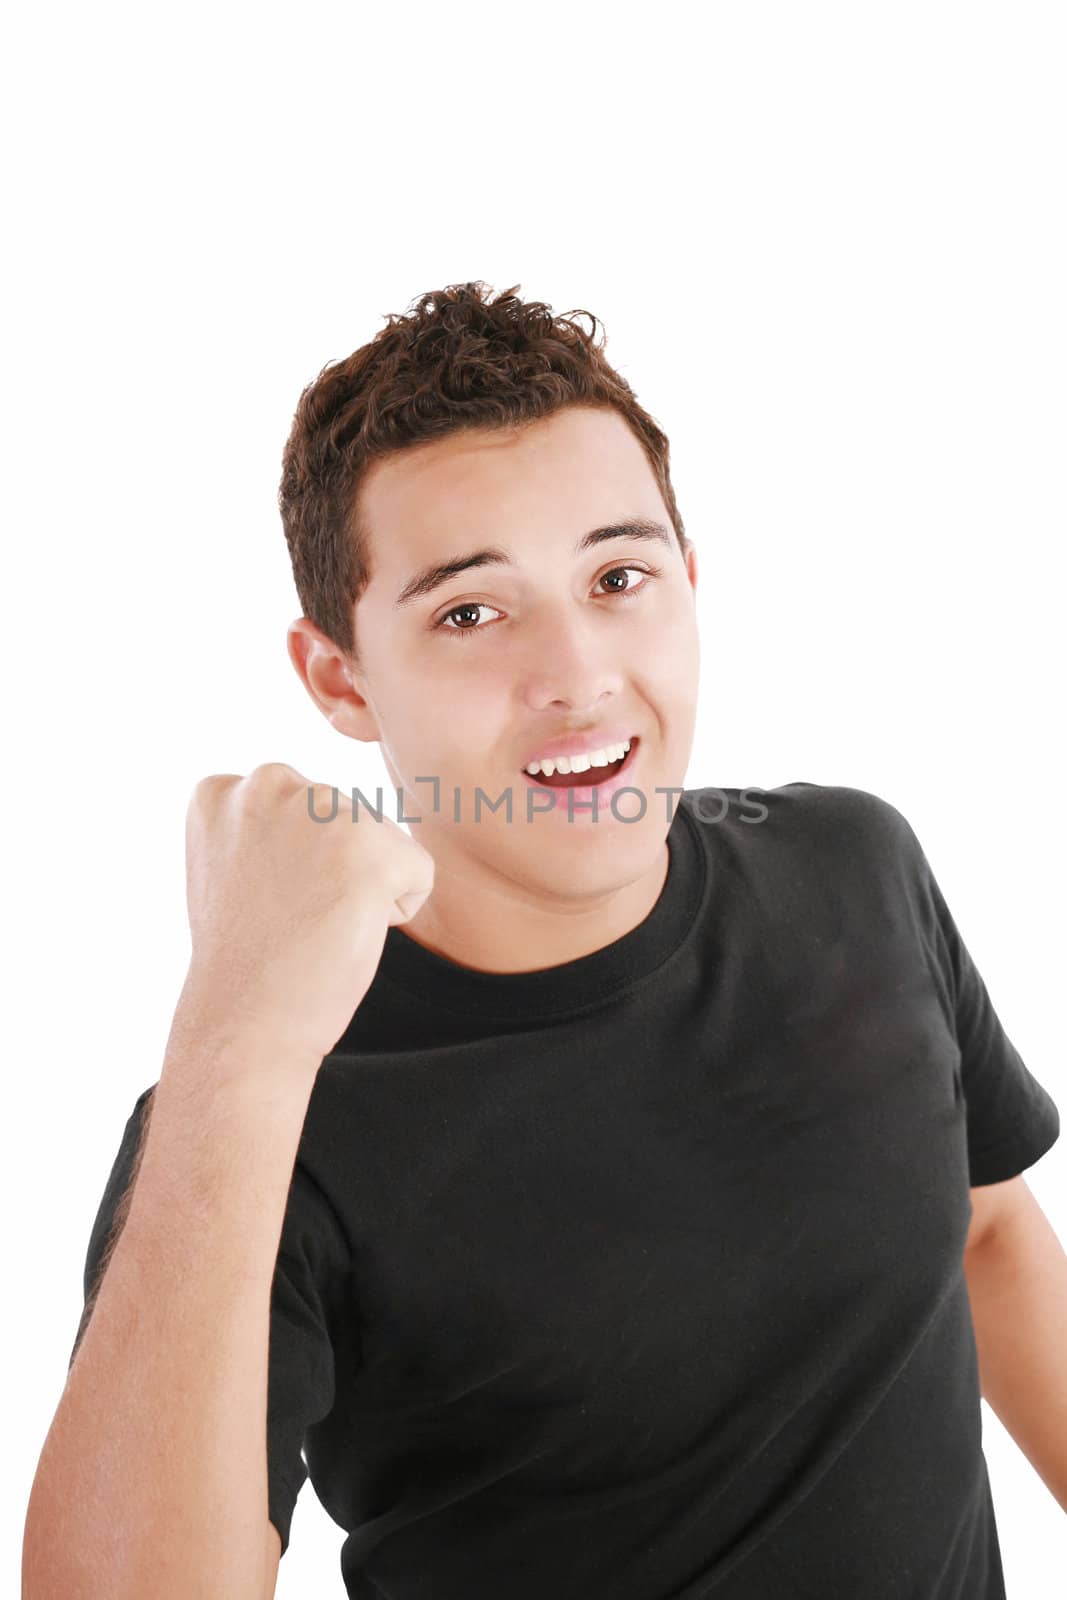 Portrait of an emotional young man. Isolated over white background.